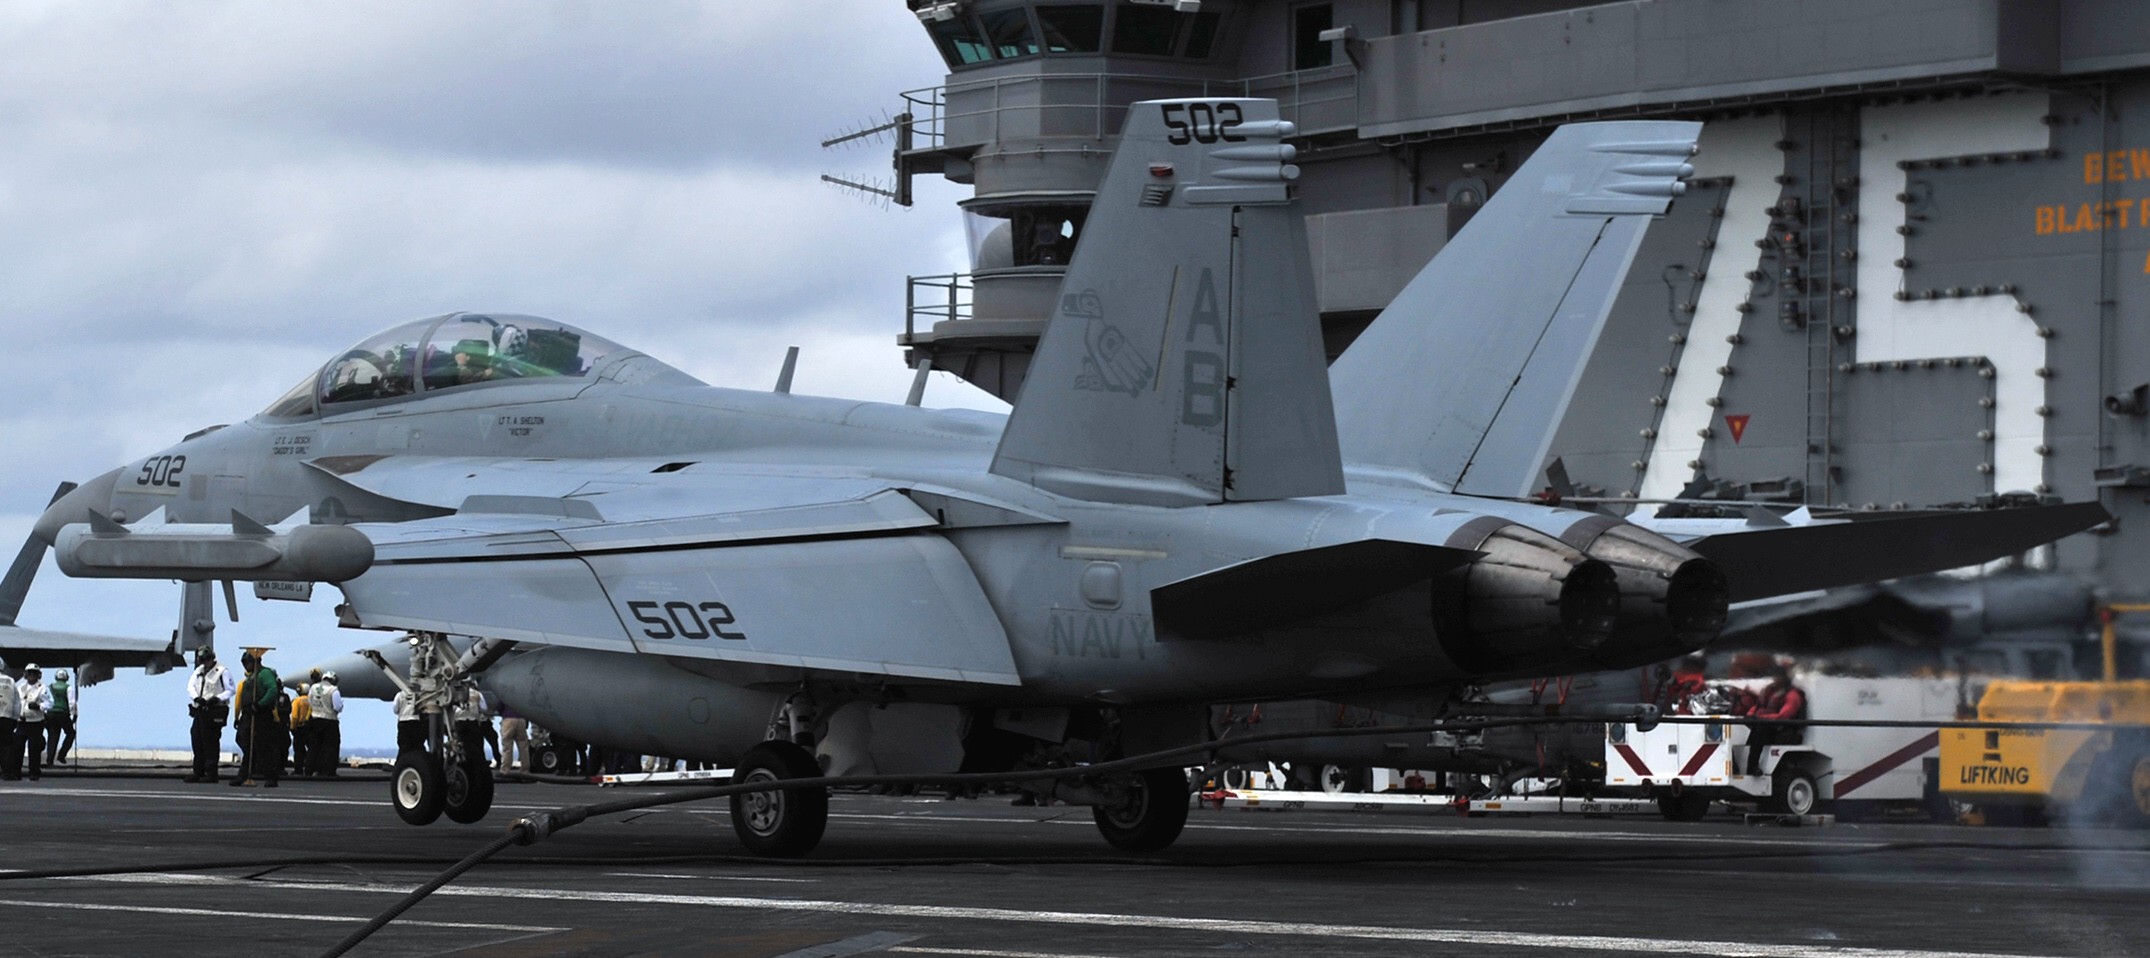 vaq-137 rooks electronic attack squadron us navy ea-18g growler carrier air wing cvw-1 uss harry s. truman cvn-75 59